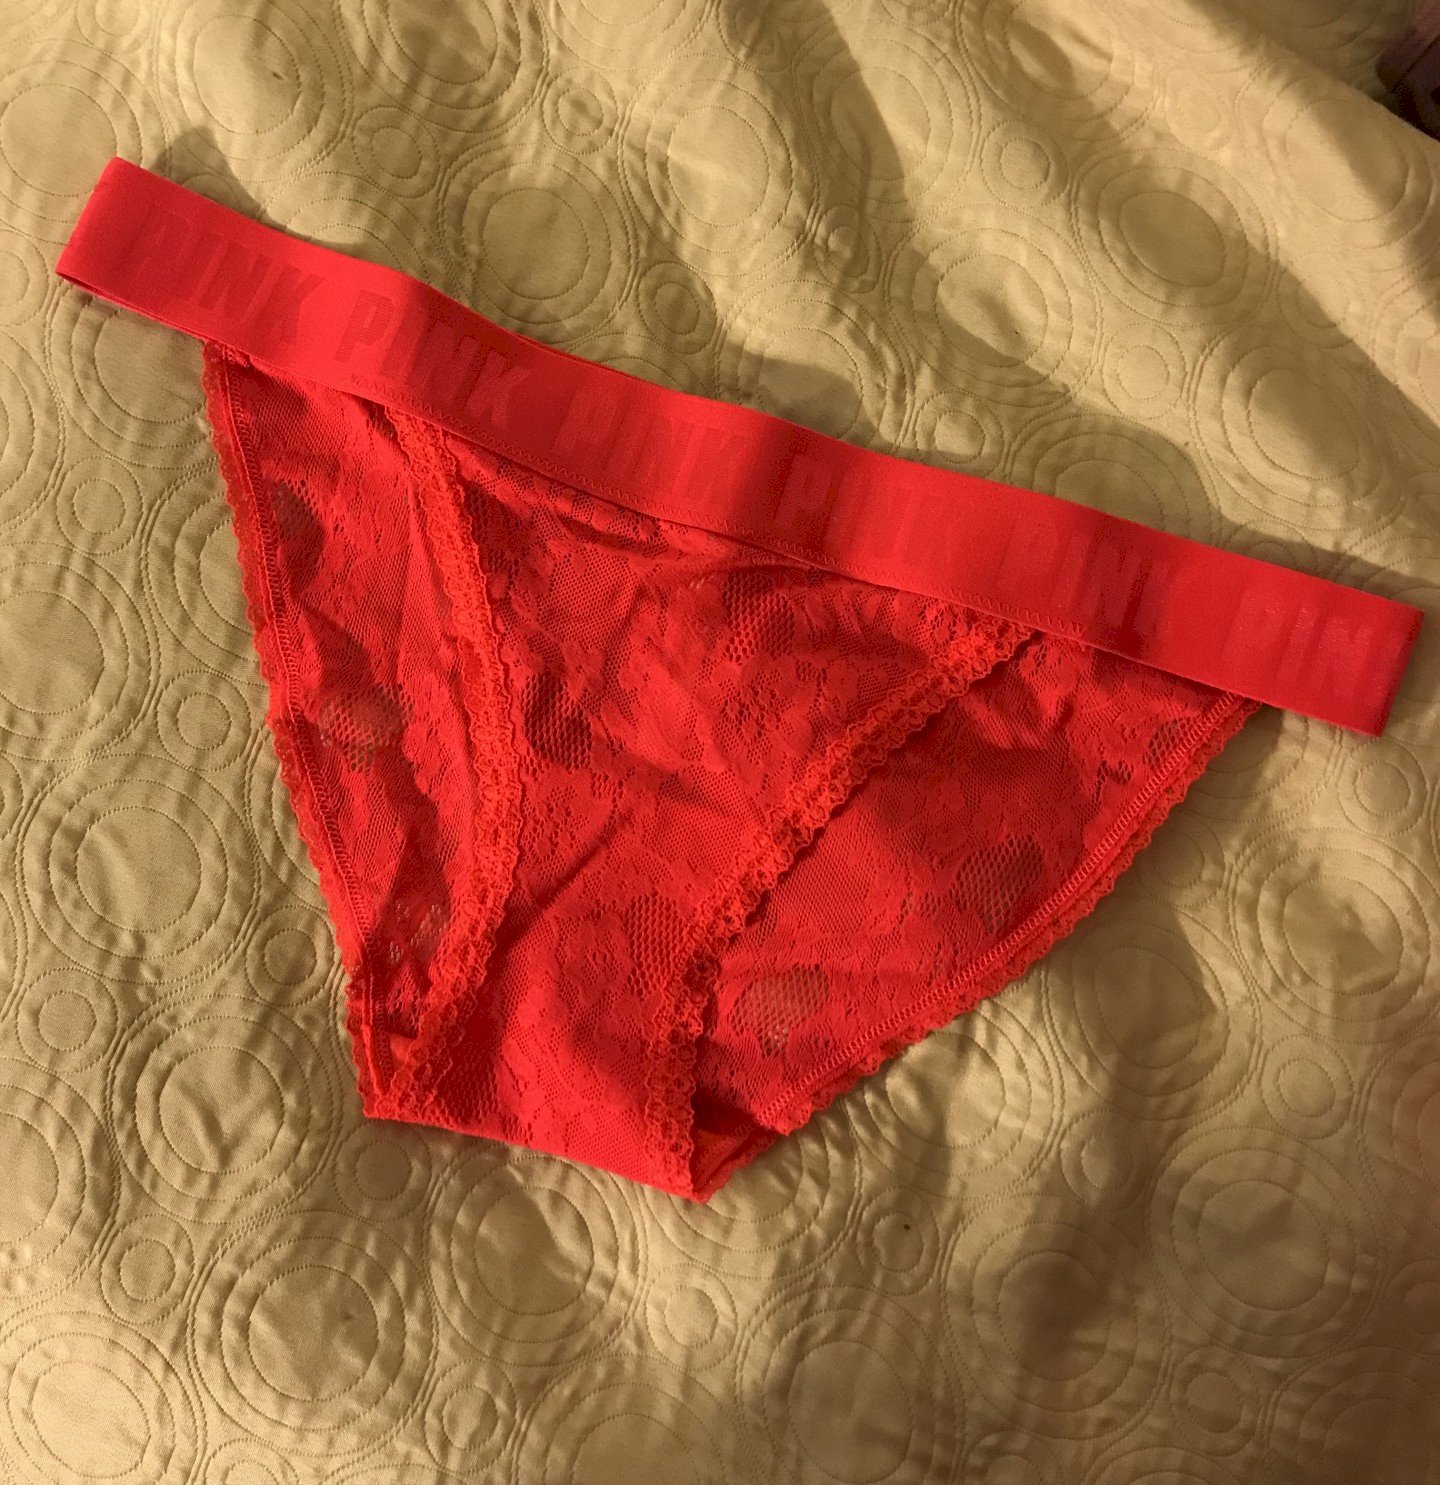 Customizable panty - World's #1 Marketplace for Used Panties